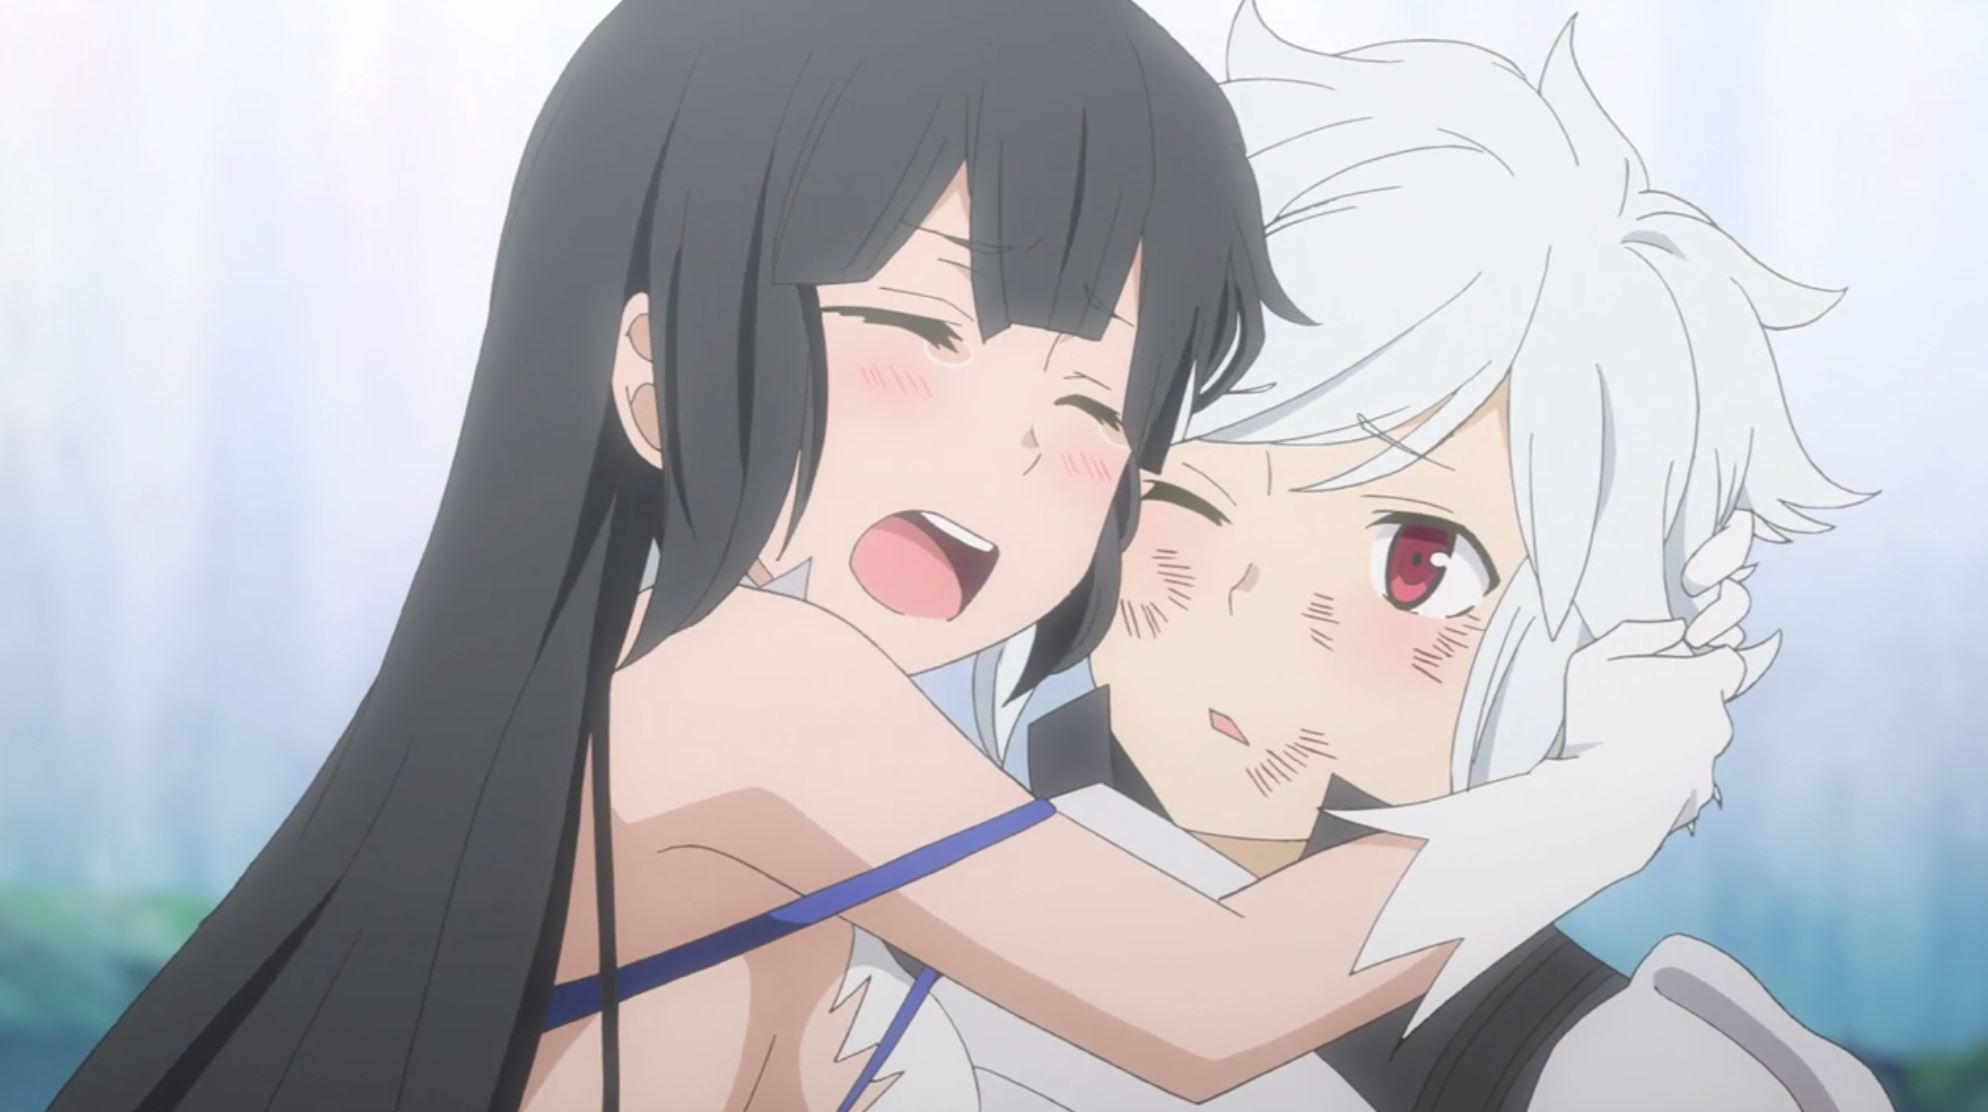 Anime Is It Wrong to Try to Pick Up Girls in a Dungeon? HD Wallpaper | Background Image